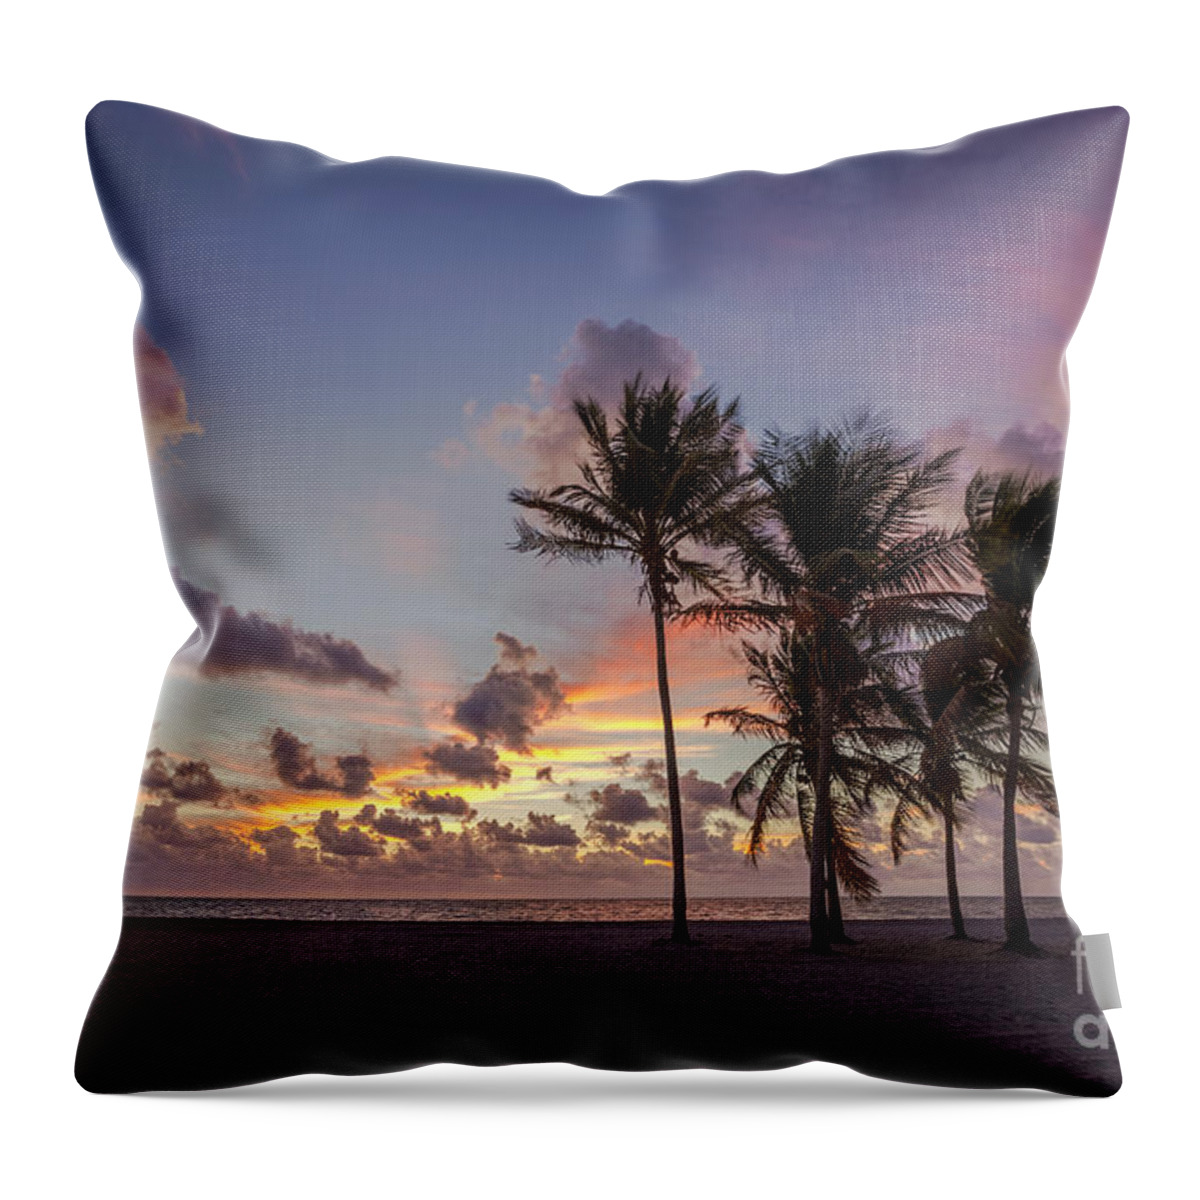 Key Biscayne Throw Pillow featuring the photograph Out Of The Sky Came The Lights by Evelina Kremsdorf